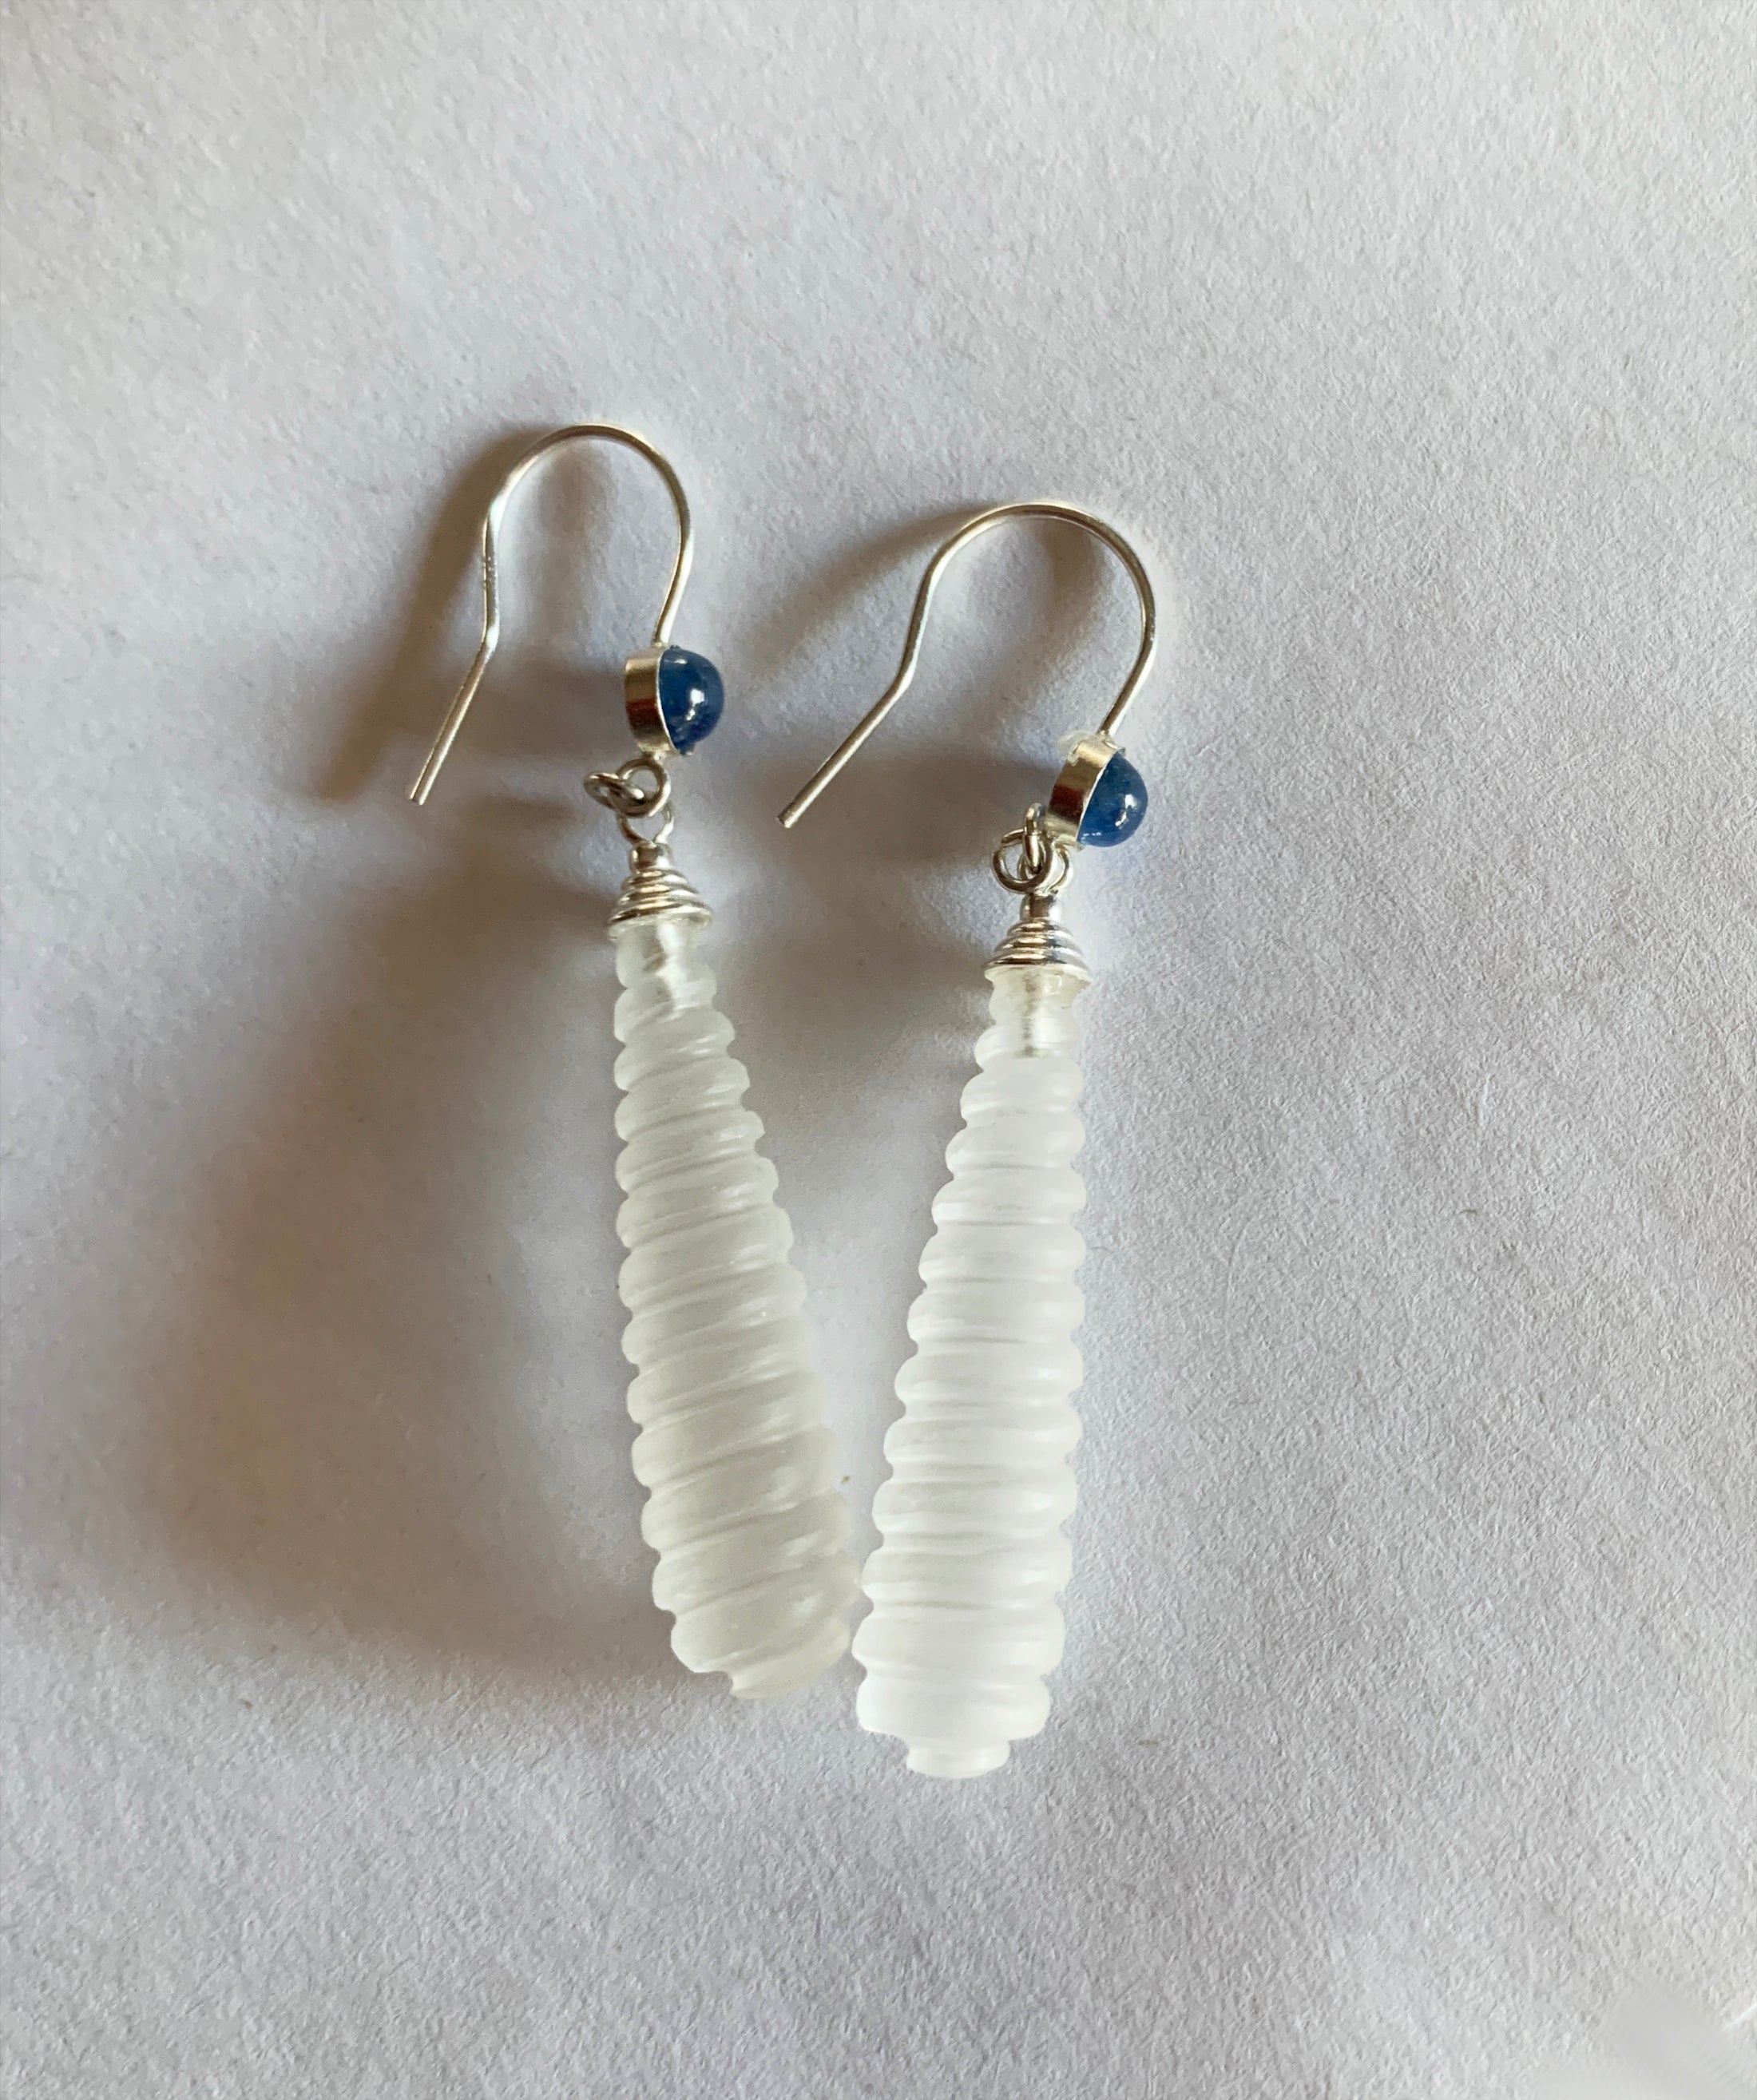 Carved Frosted Quartz Drop Earrings with Sapphire in Sterling Silver